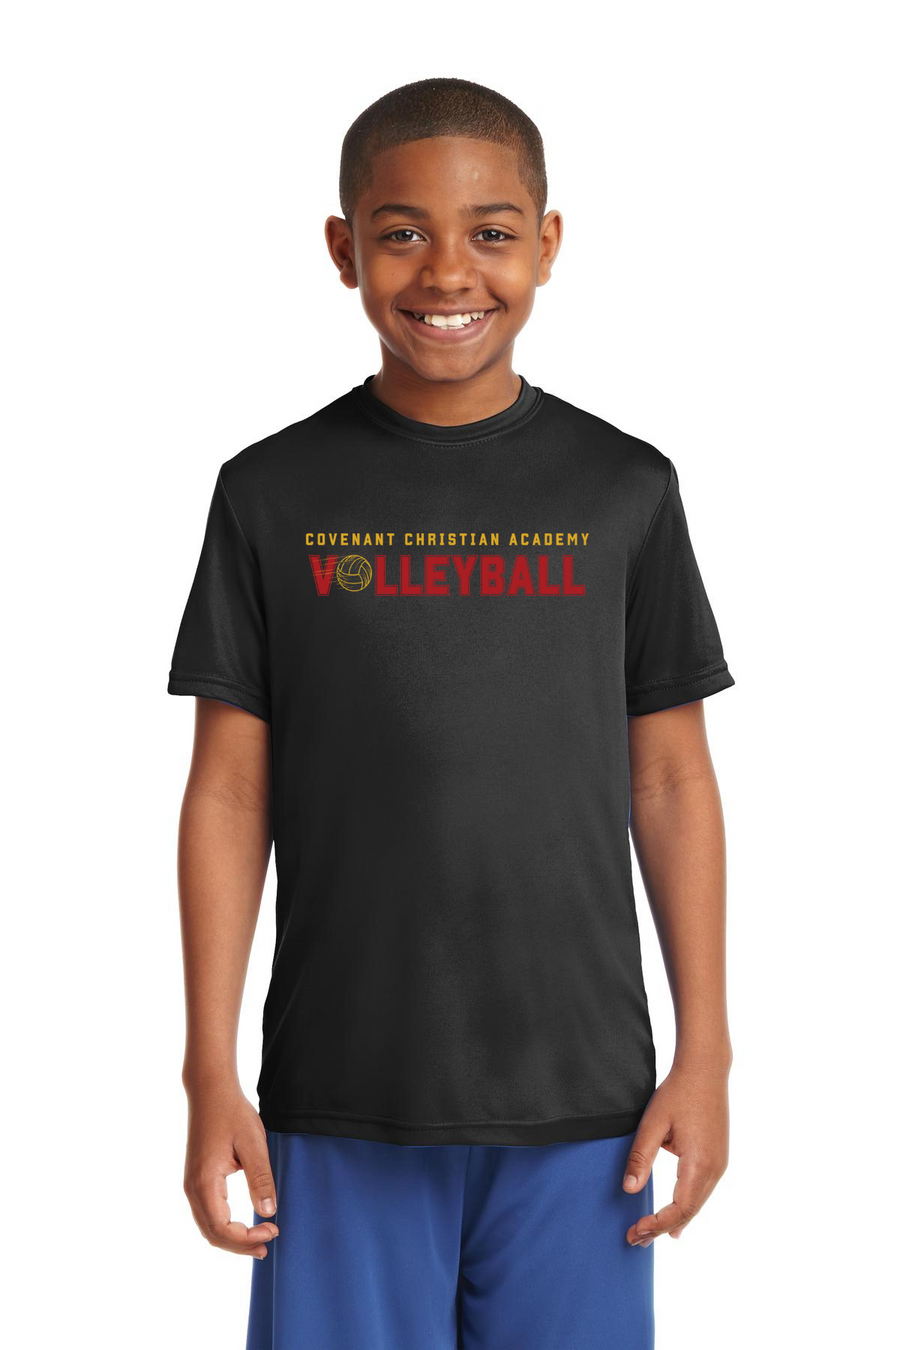 Covenant Christian Academy Spirit Wear 2023-24 On-Demand-Youth Unisex Dri-Fit Shirt Volleyball